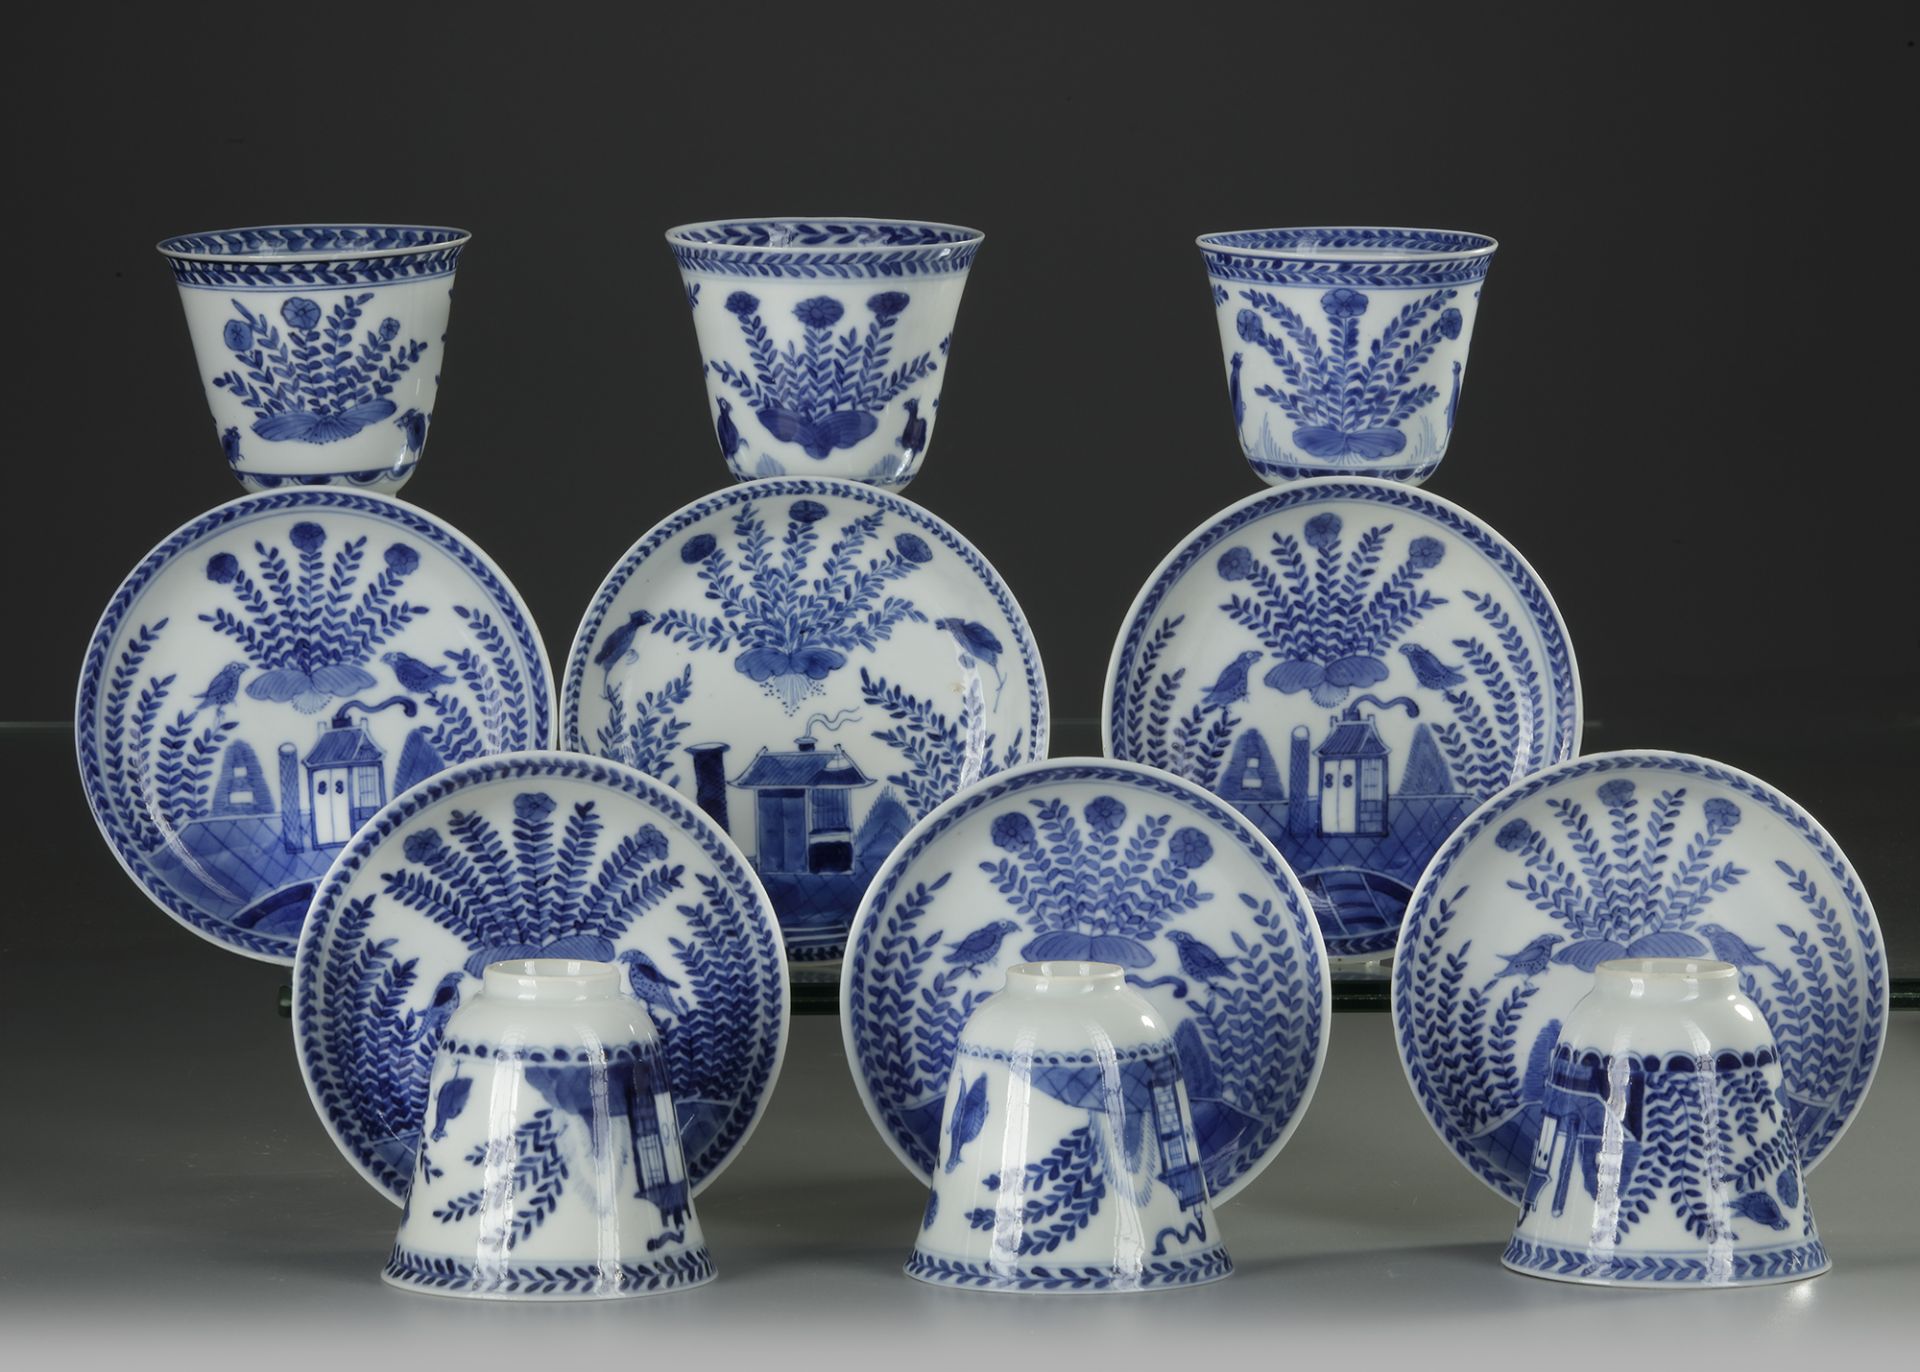 SIX CHINESE BLUE AND WHITE 'CUCKOO IN THE HOUSE' CUPS AND SACUERS, 18TH CENTURY - Image 2 of 3